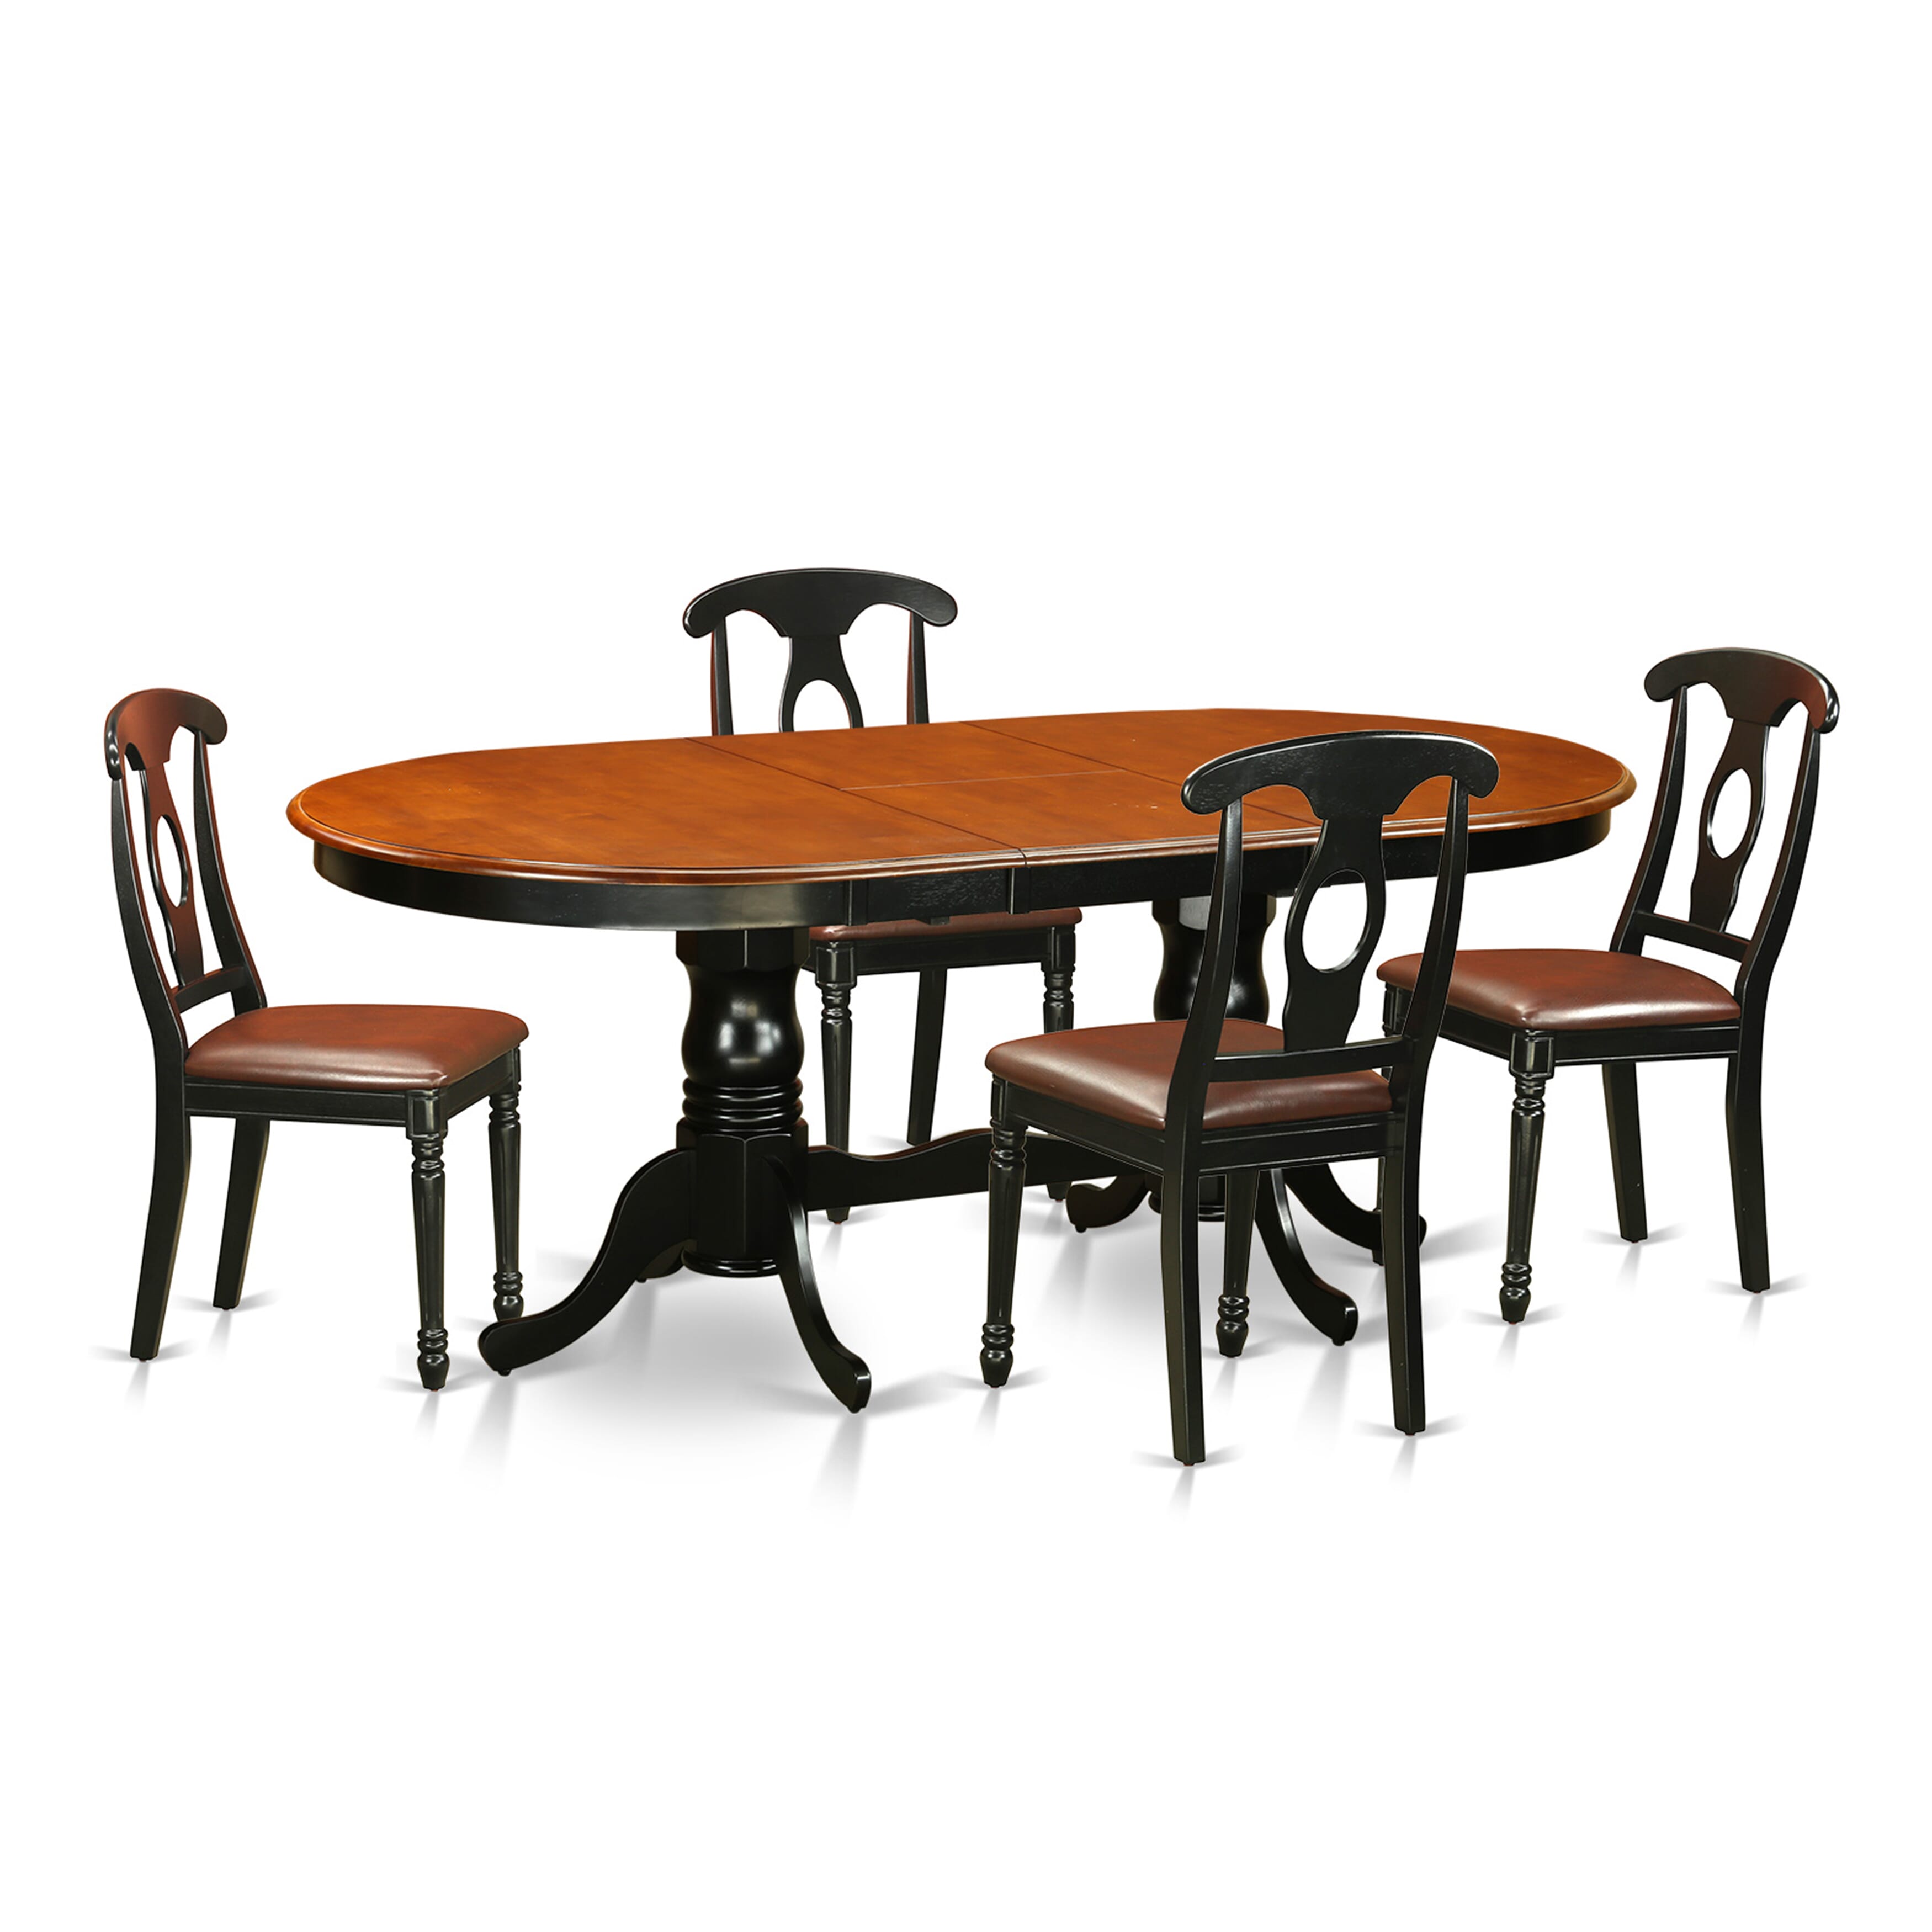 5 Pc Oval Dining room Table with Leaf and Leatherette Seat Chairs in Black / Cherry